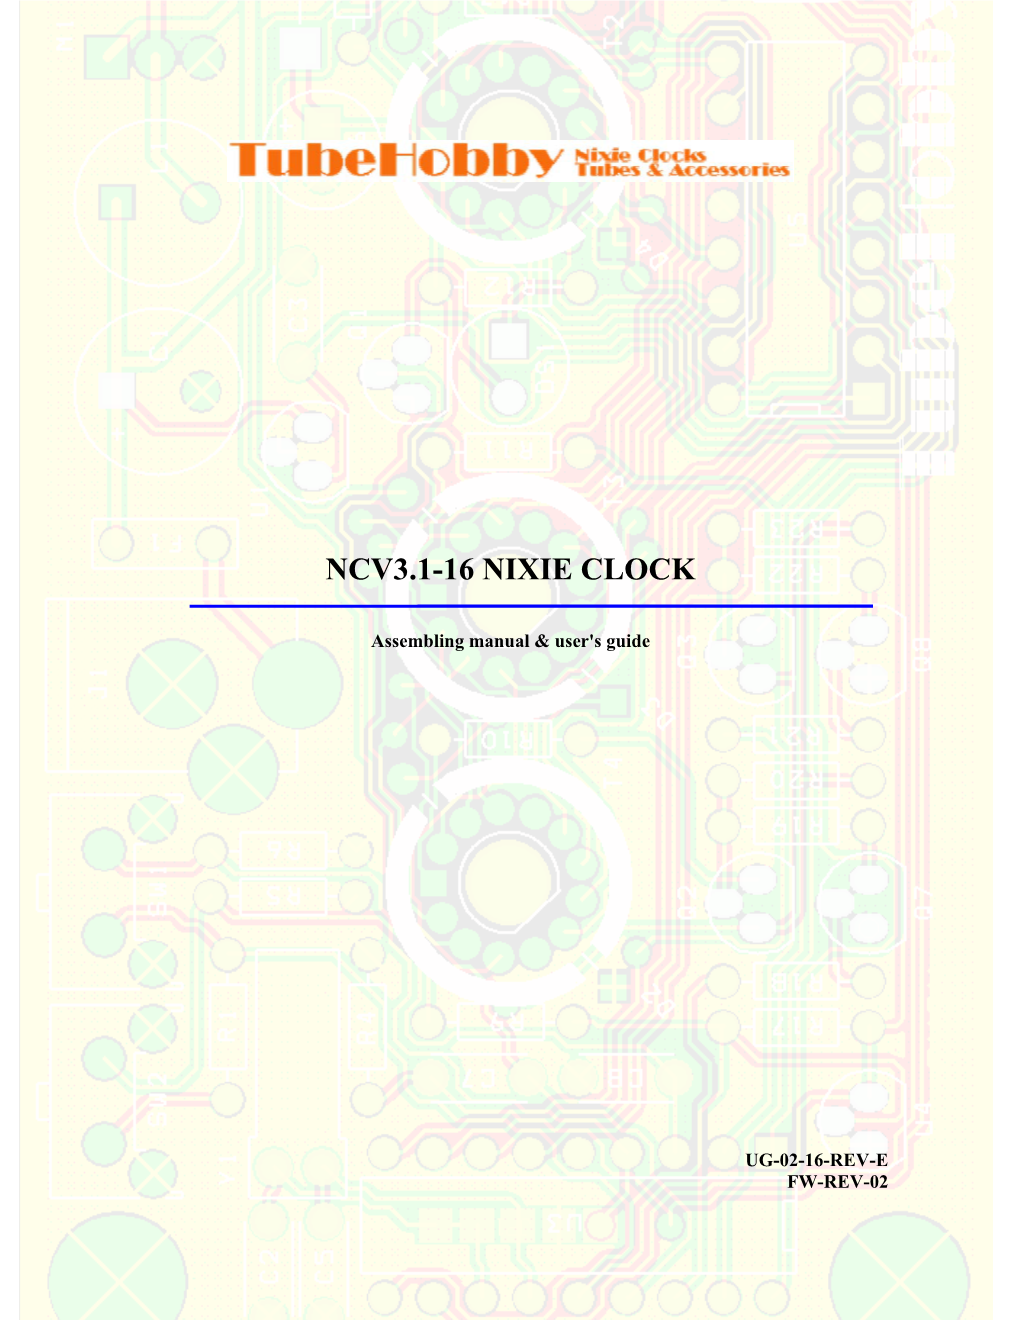 NCV3.1-16 Assembling Manual and Users Guide